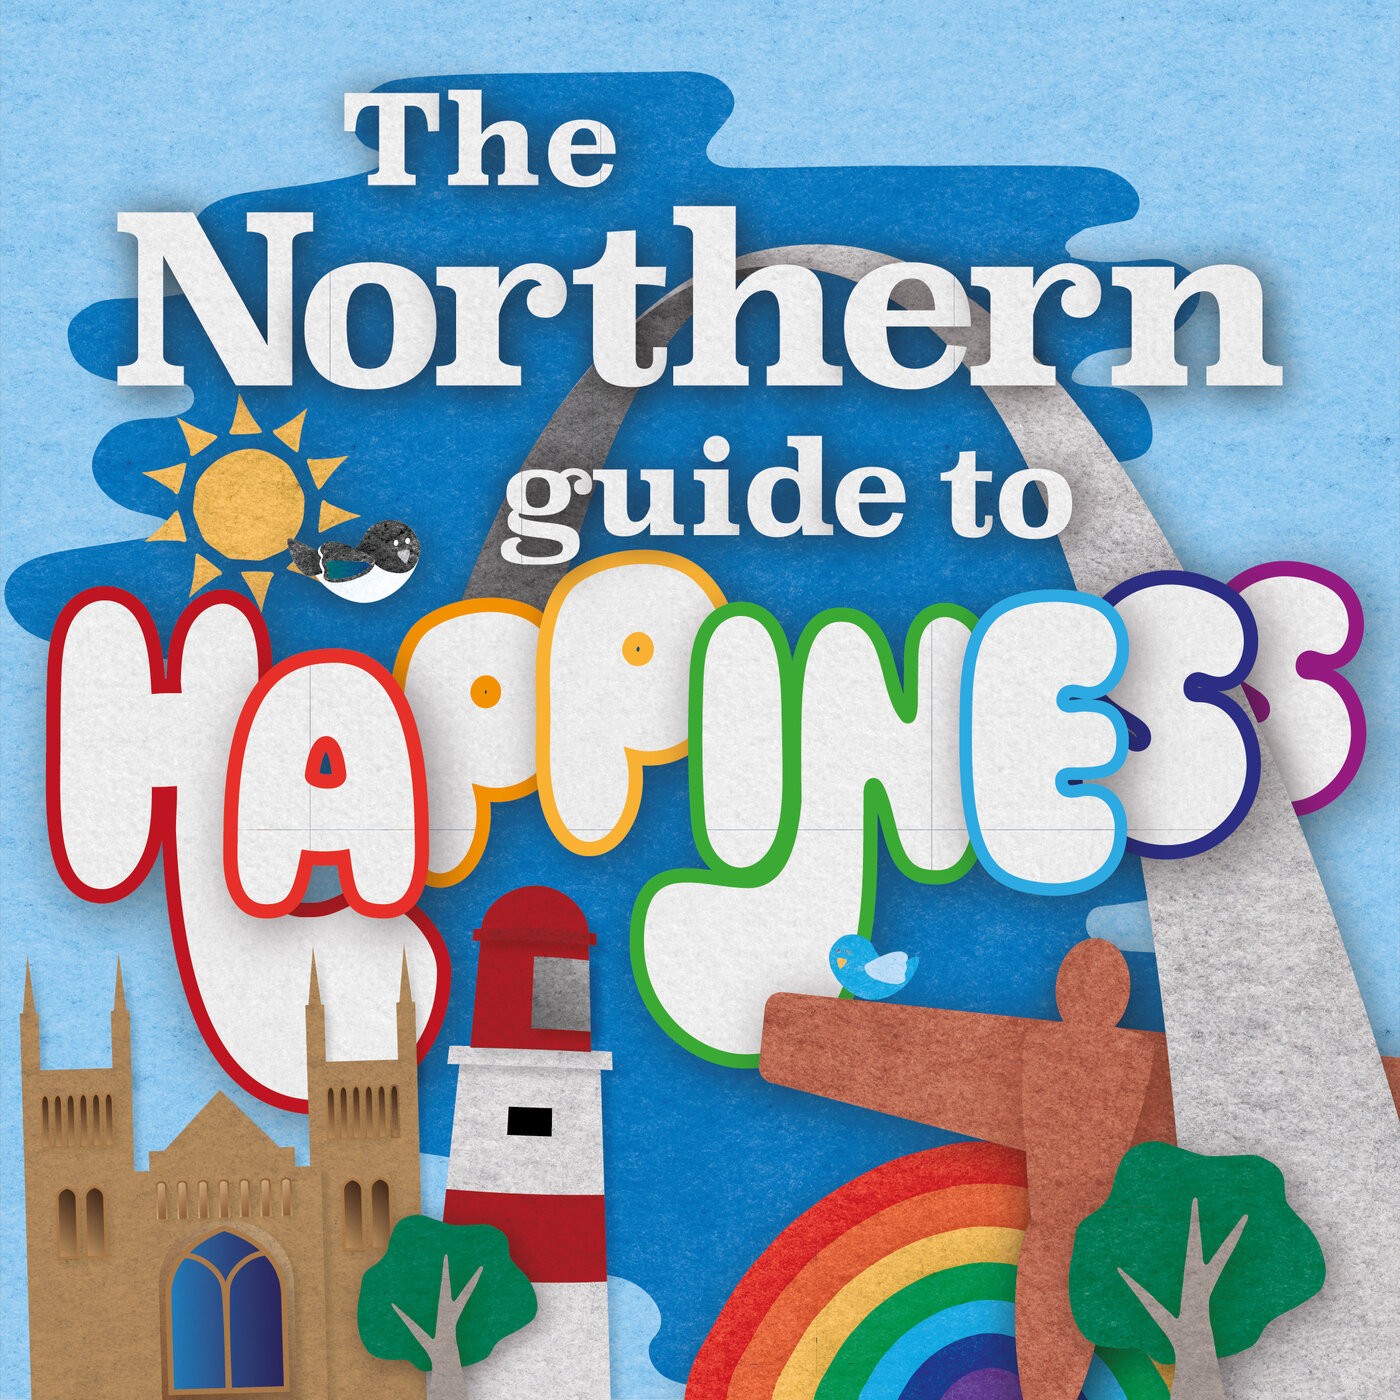 The Northern Guide to Happiness